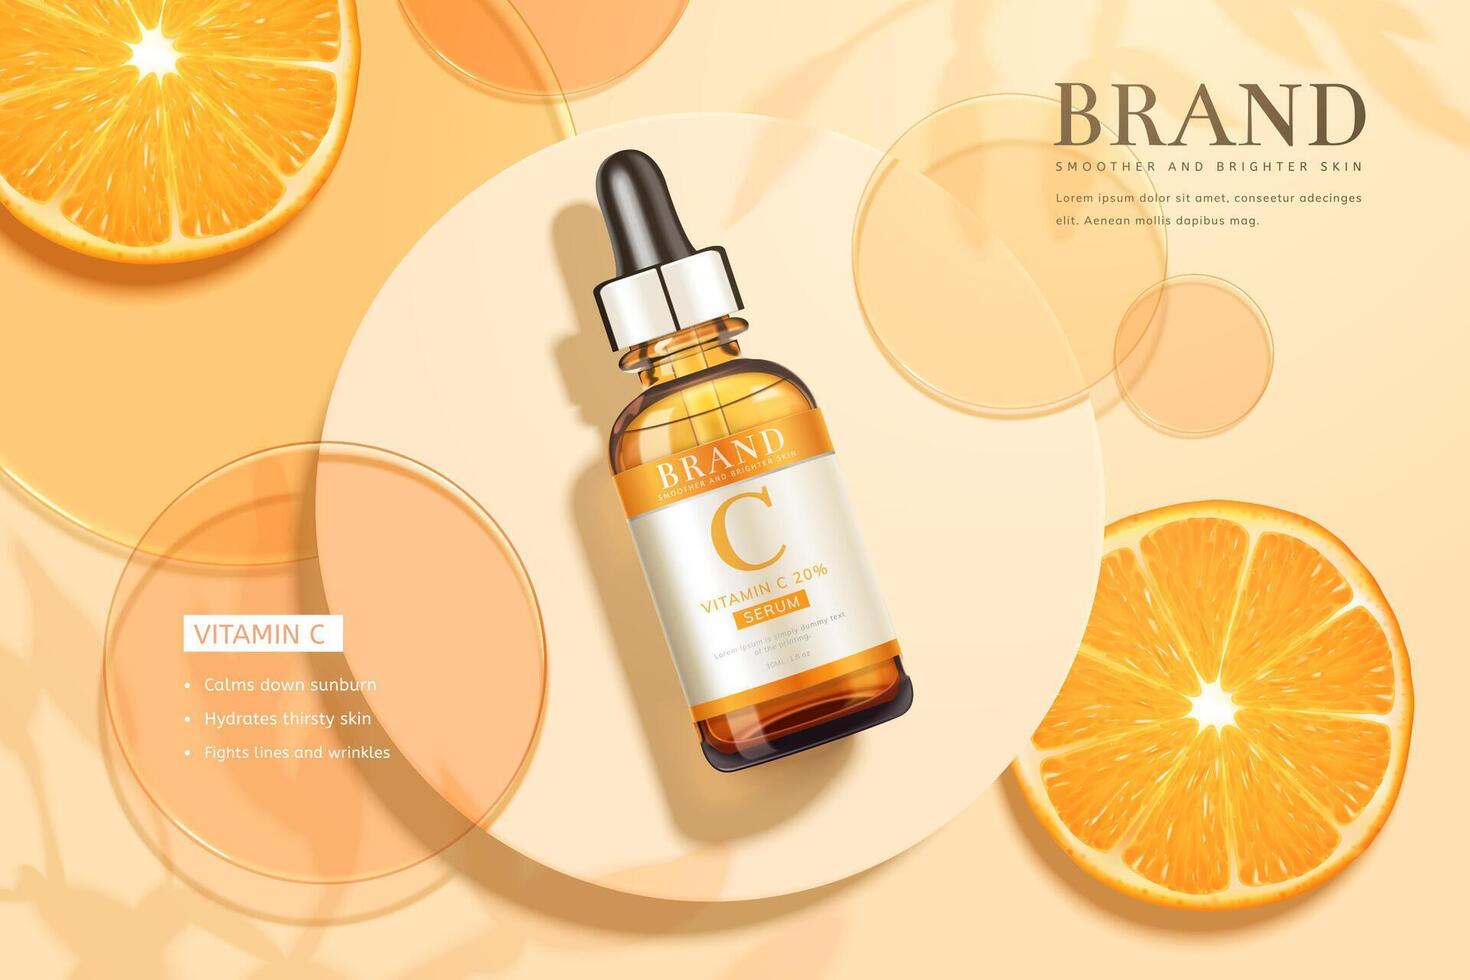 3d illustration of beauty product ad, designed with circular disks, sliced tangerine, and realistic dropper bottle, summer skincare concept vector